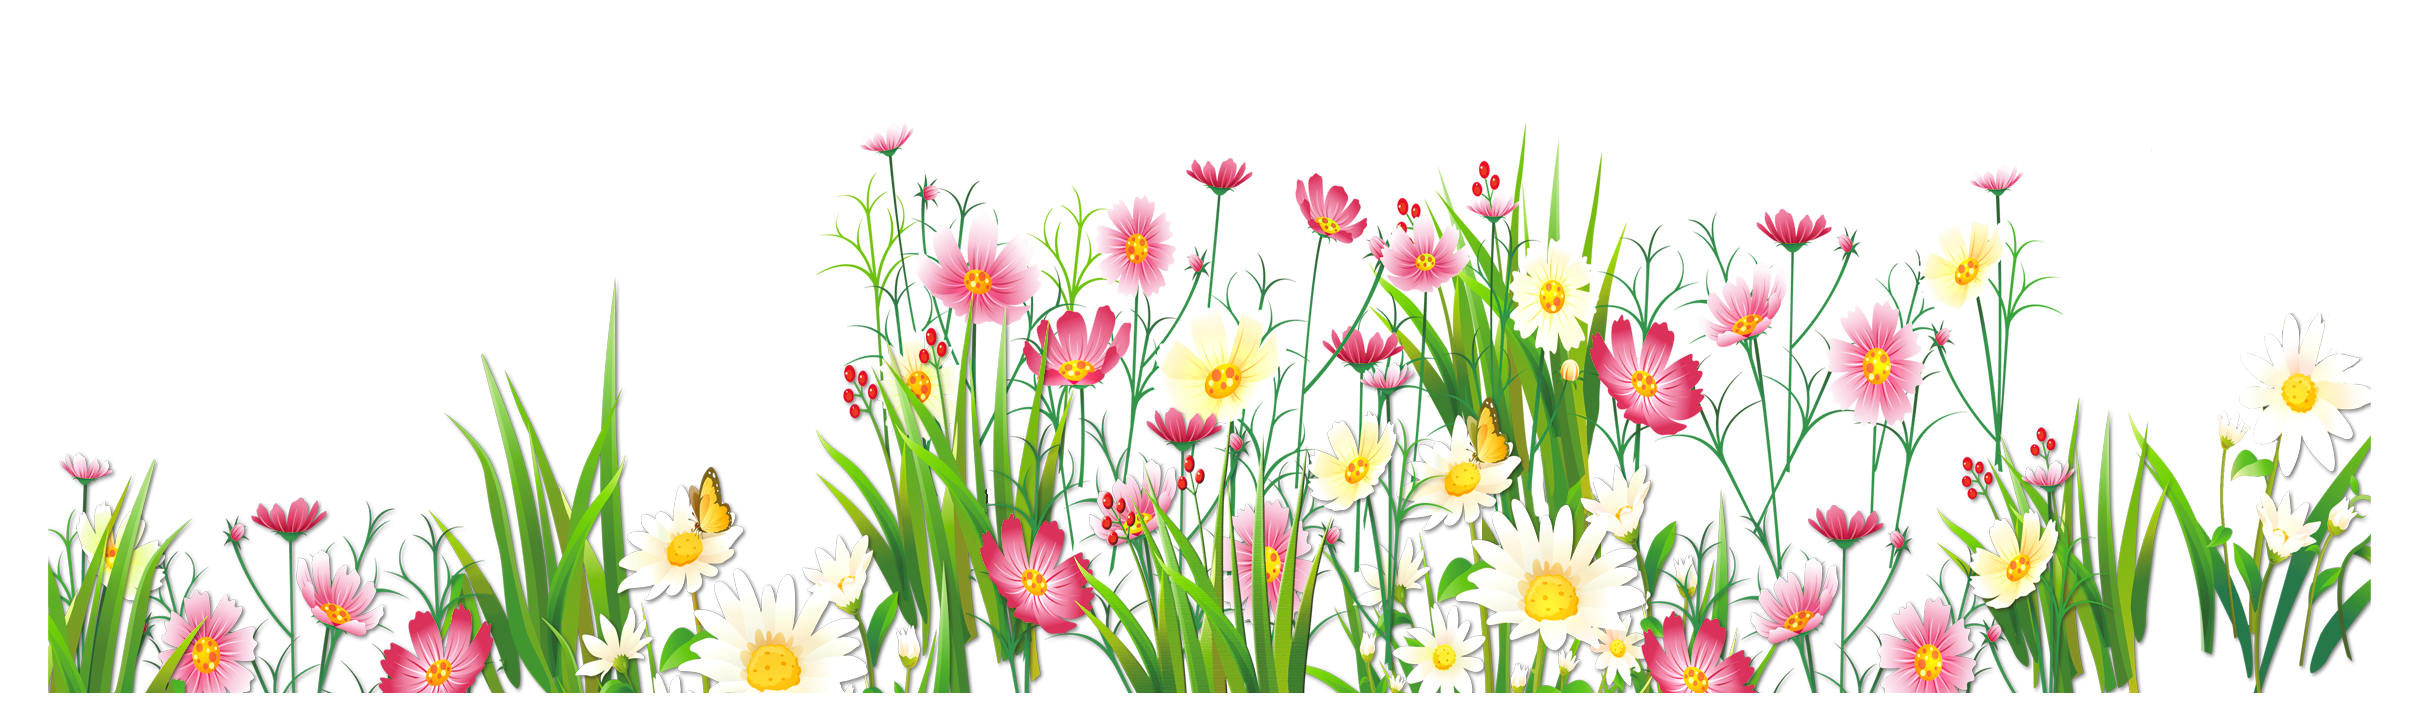 free clipart grass and flowers - photo #12